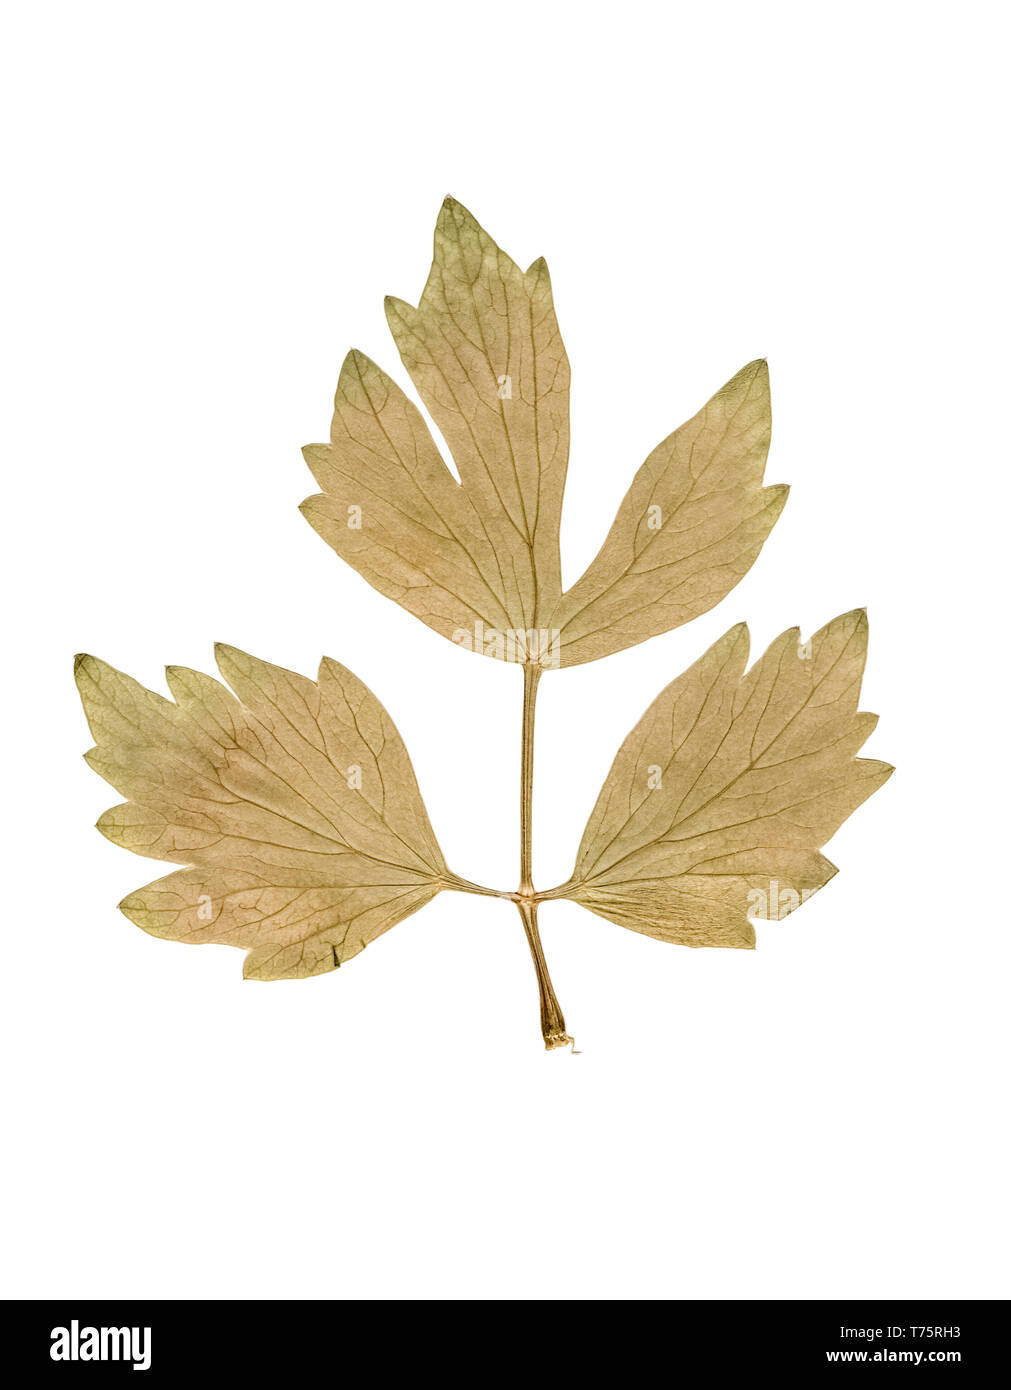 Herbarium. Pressed and dried leaves on a white background. Stock Photo